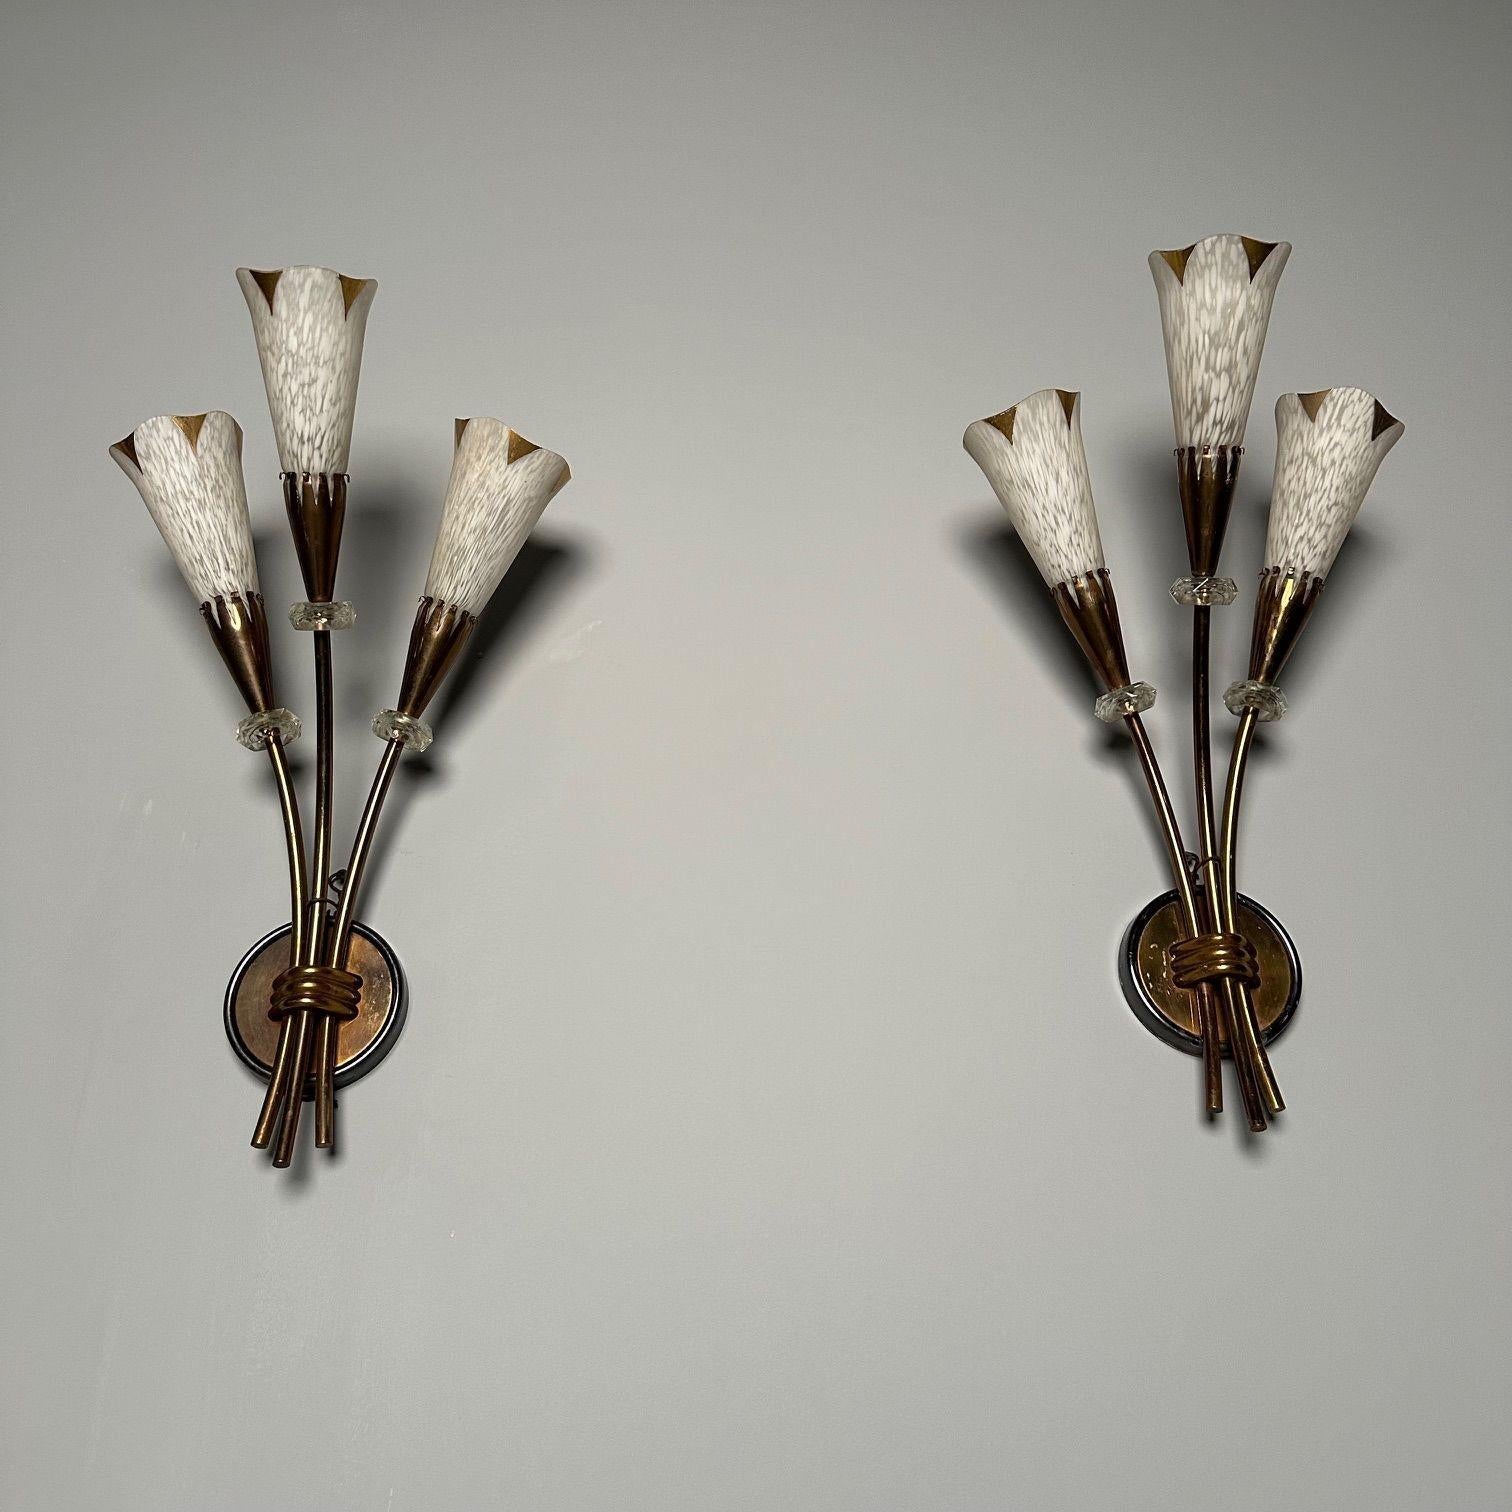 Mid-20th Century French Mid-Century Modern, Three Arm Sconces, Brass, Crystal, France, 1950s For Sale